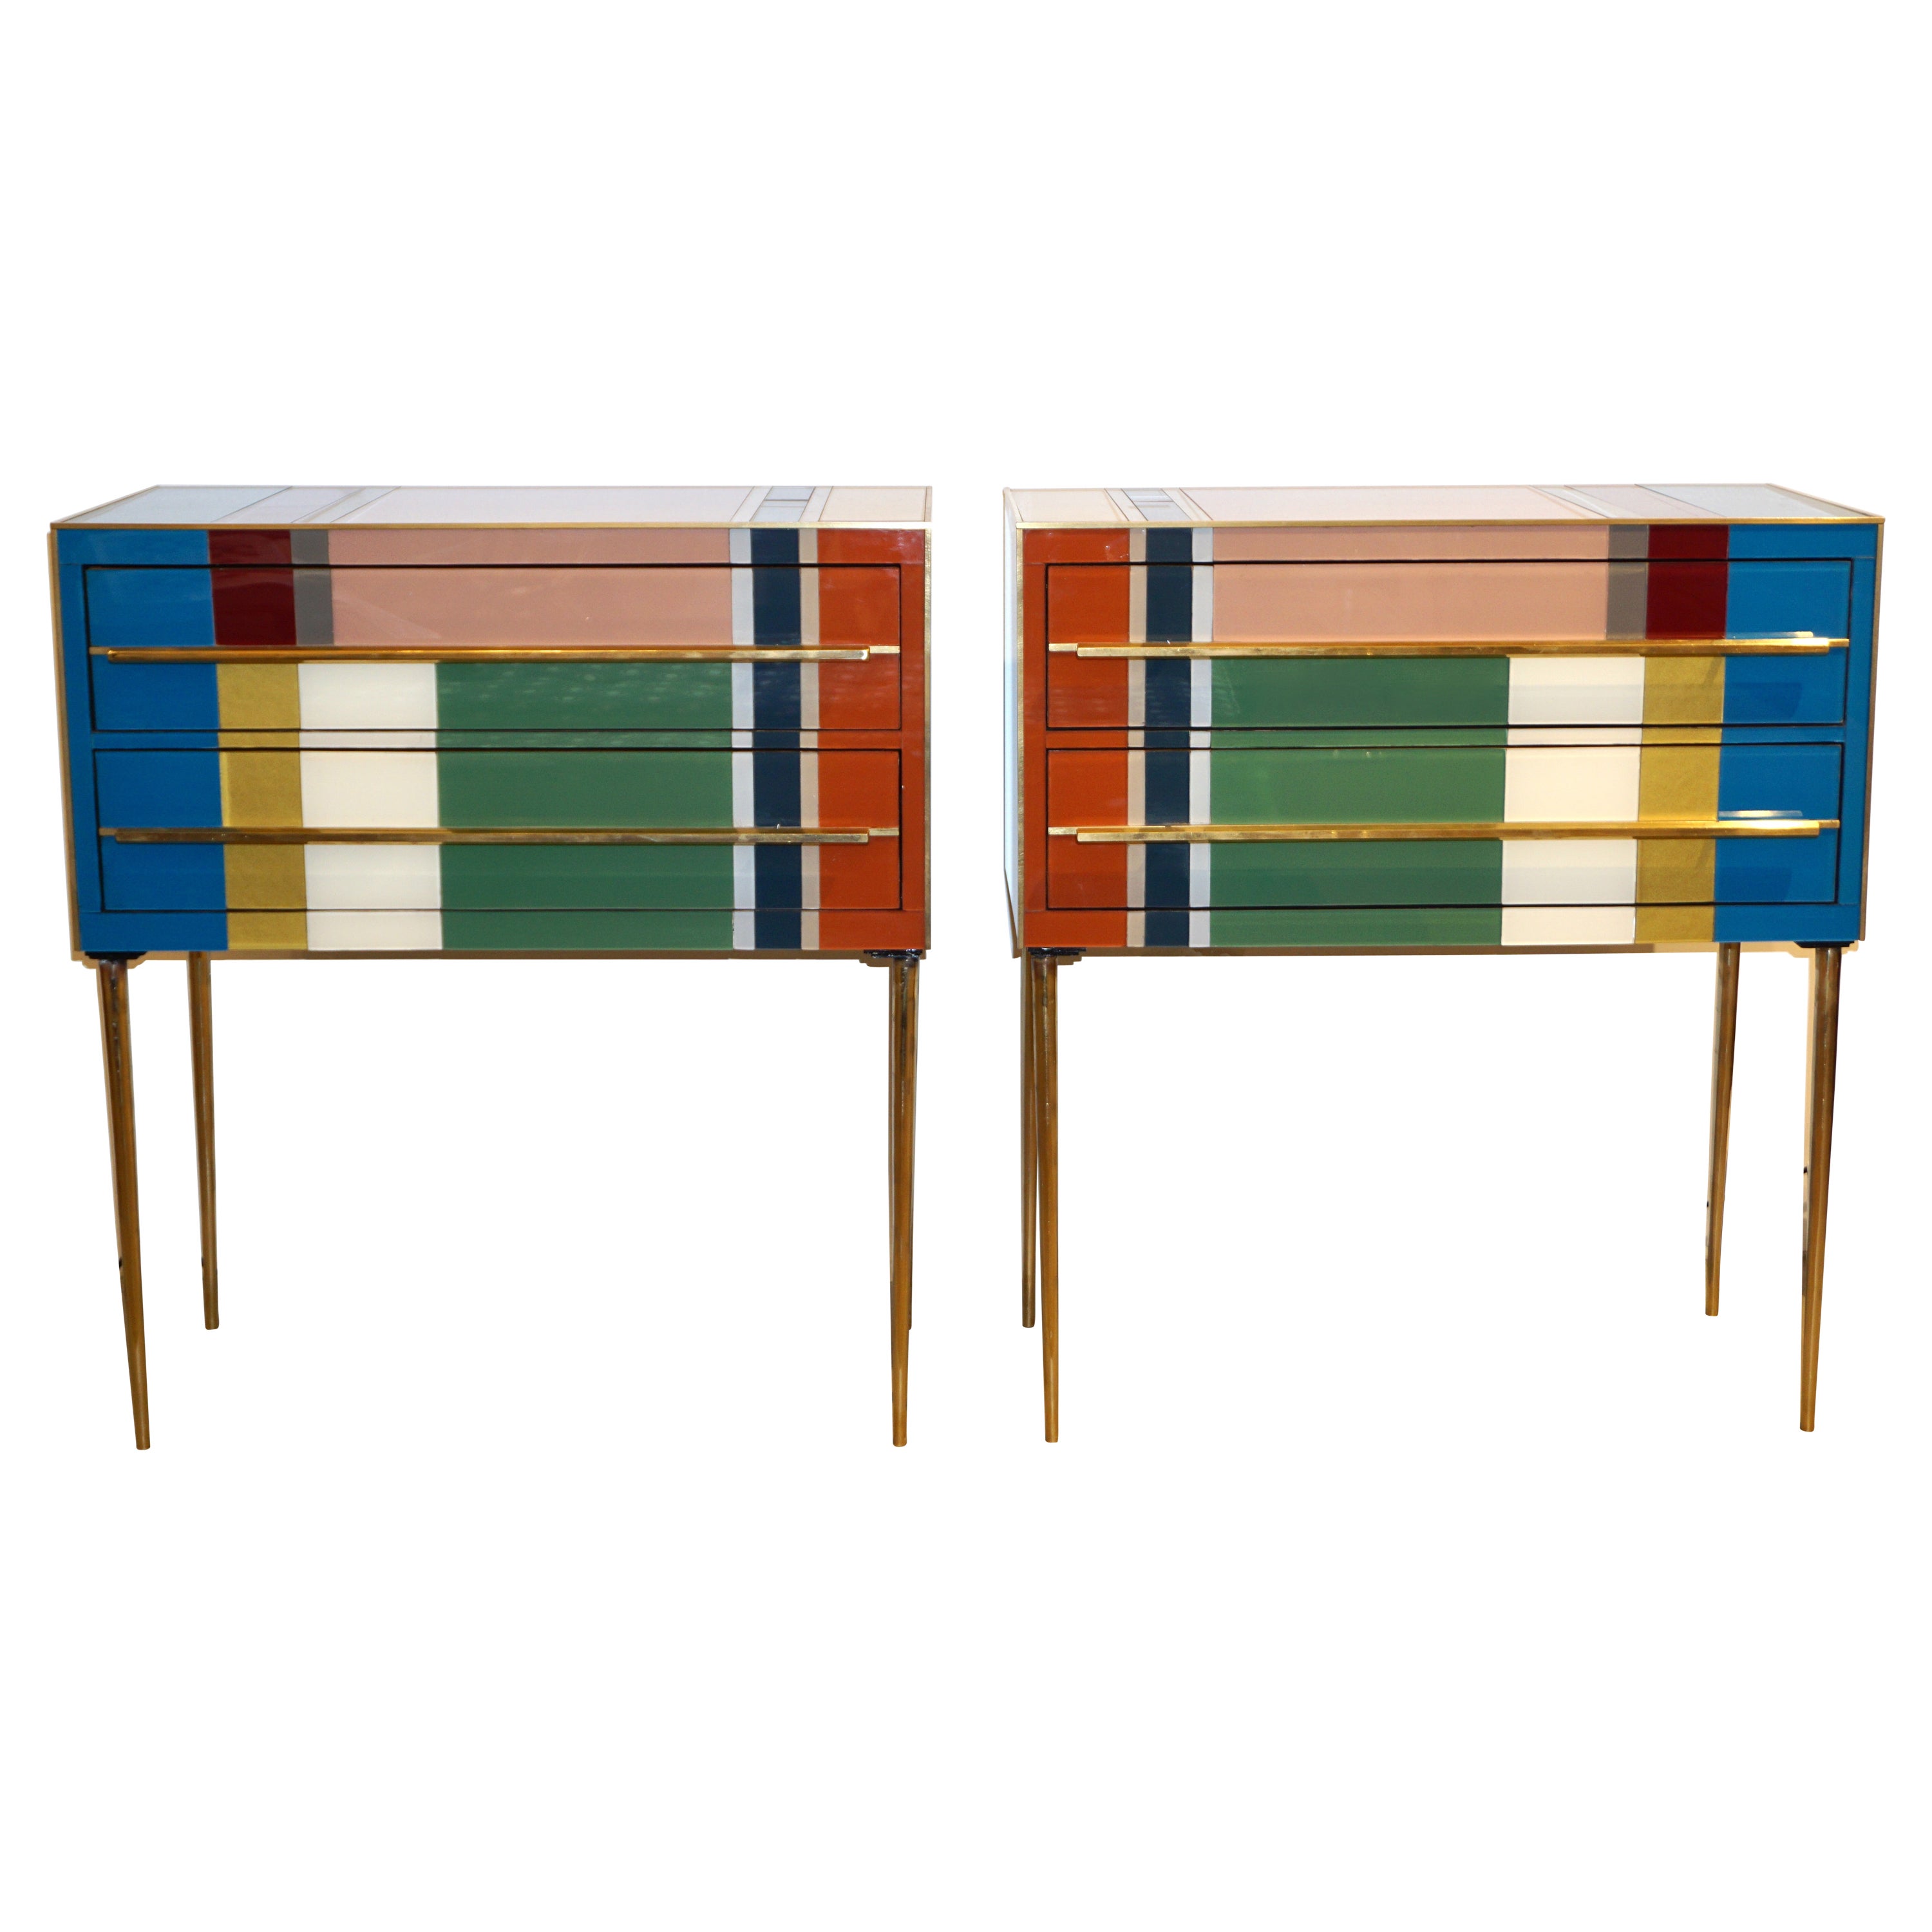 Bespoke Italian Pair of Mondrian Style Blue Green Yellow Chests / End Tables